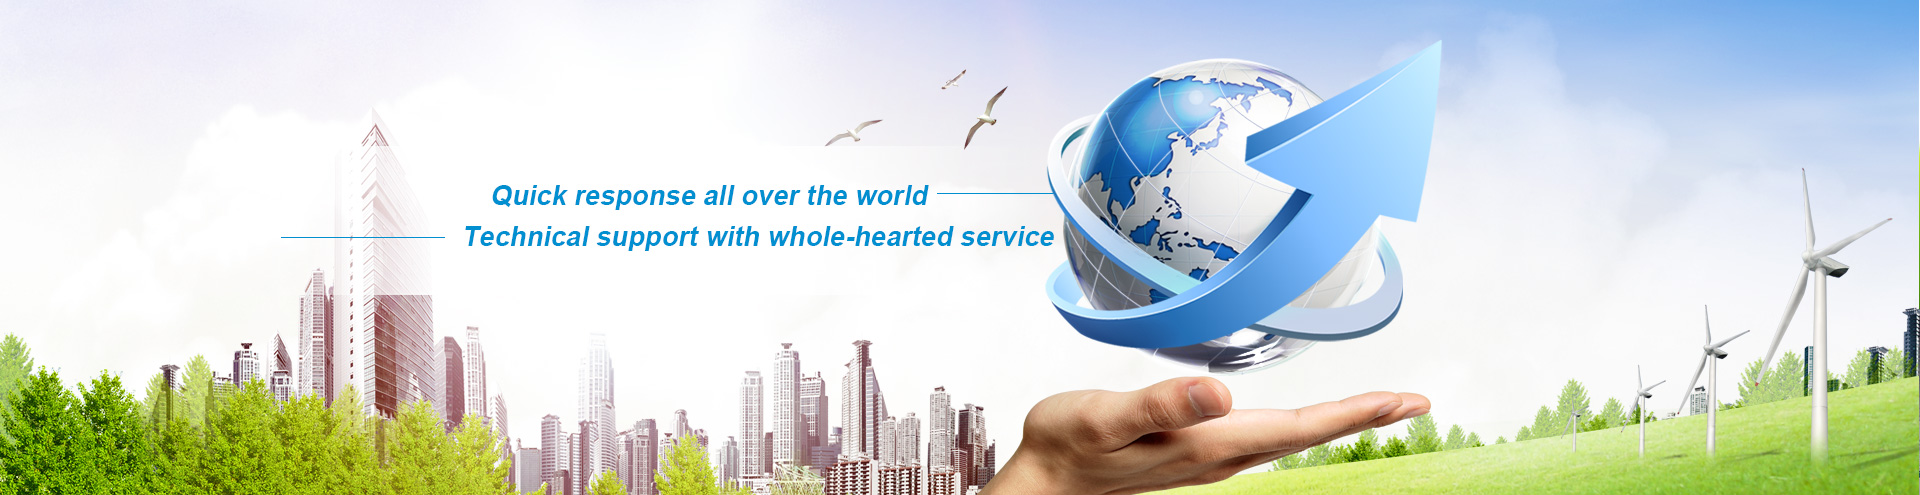 Quick response all over the world,Technical support with whole-hearted service